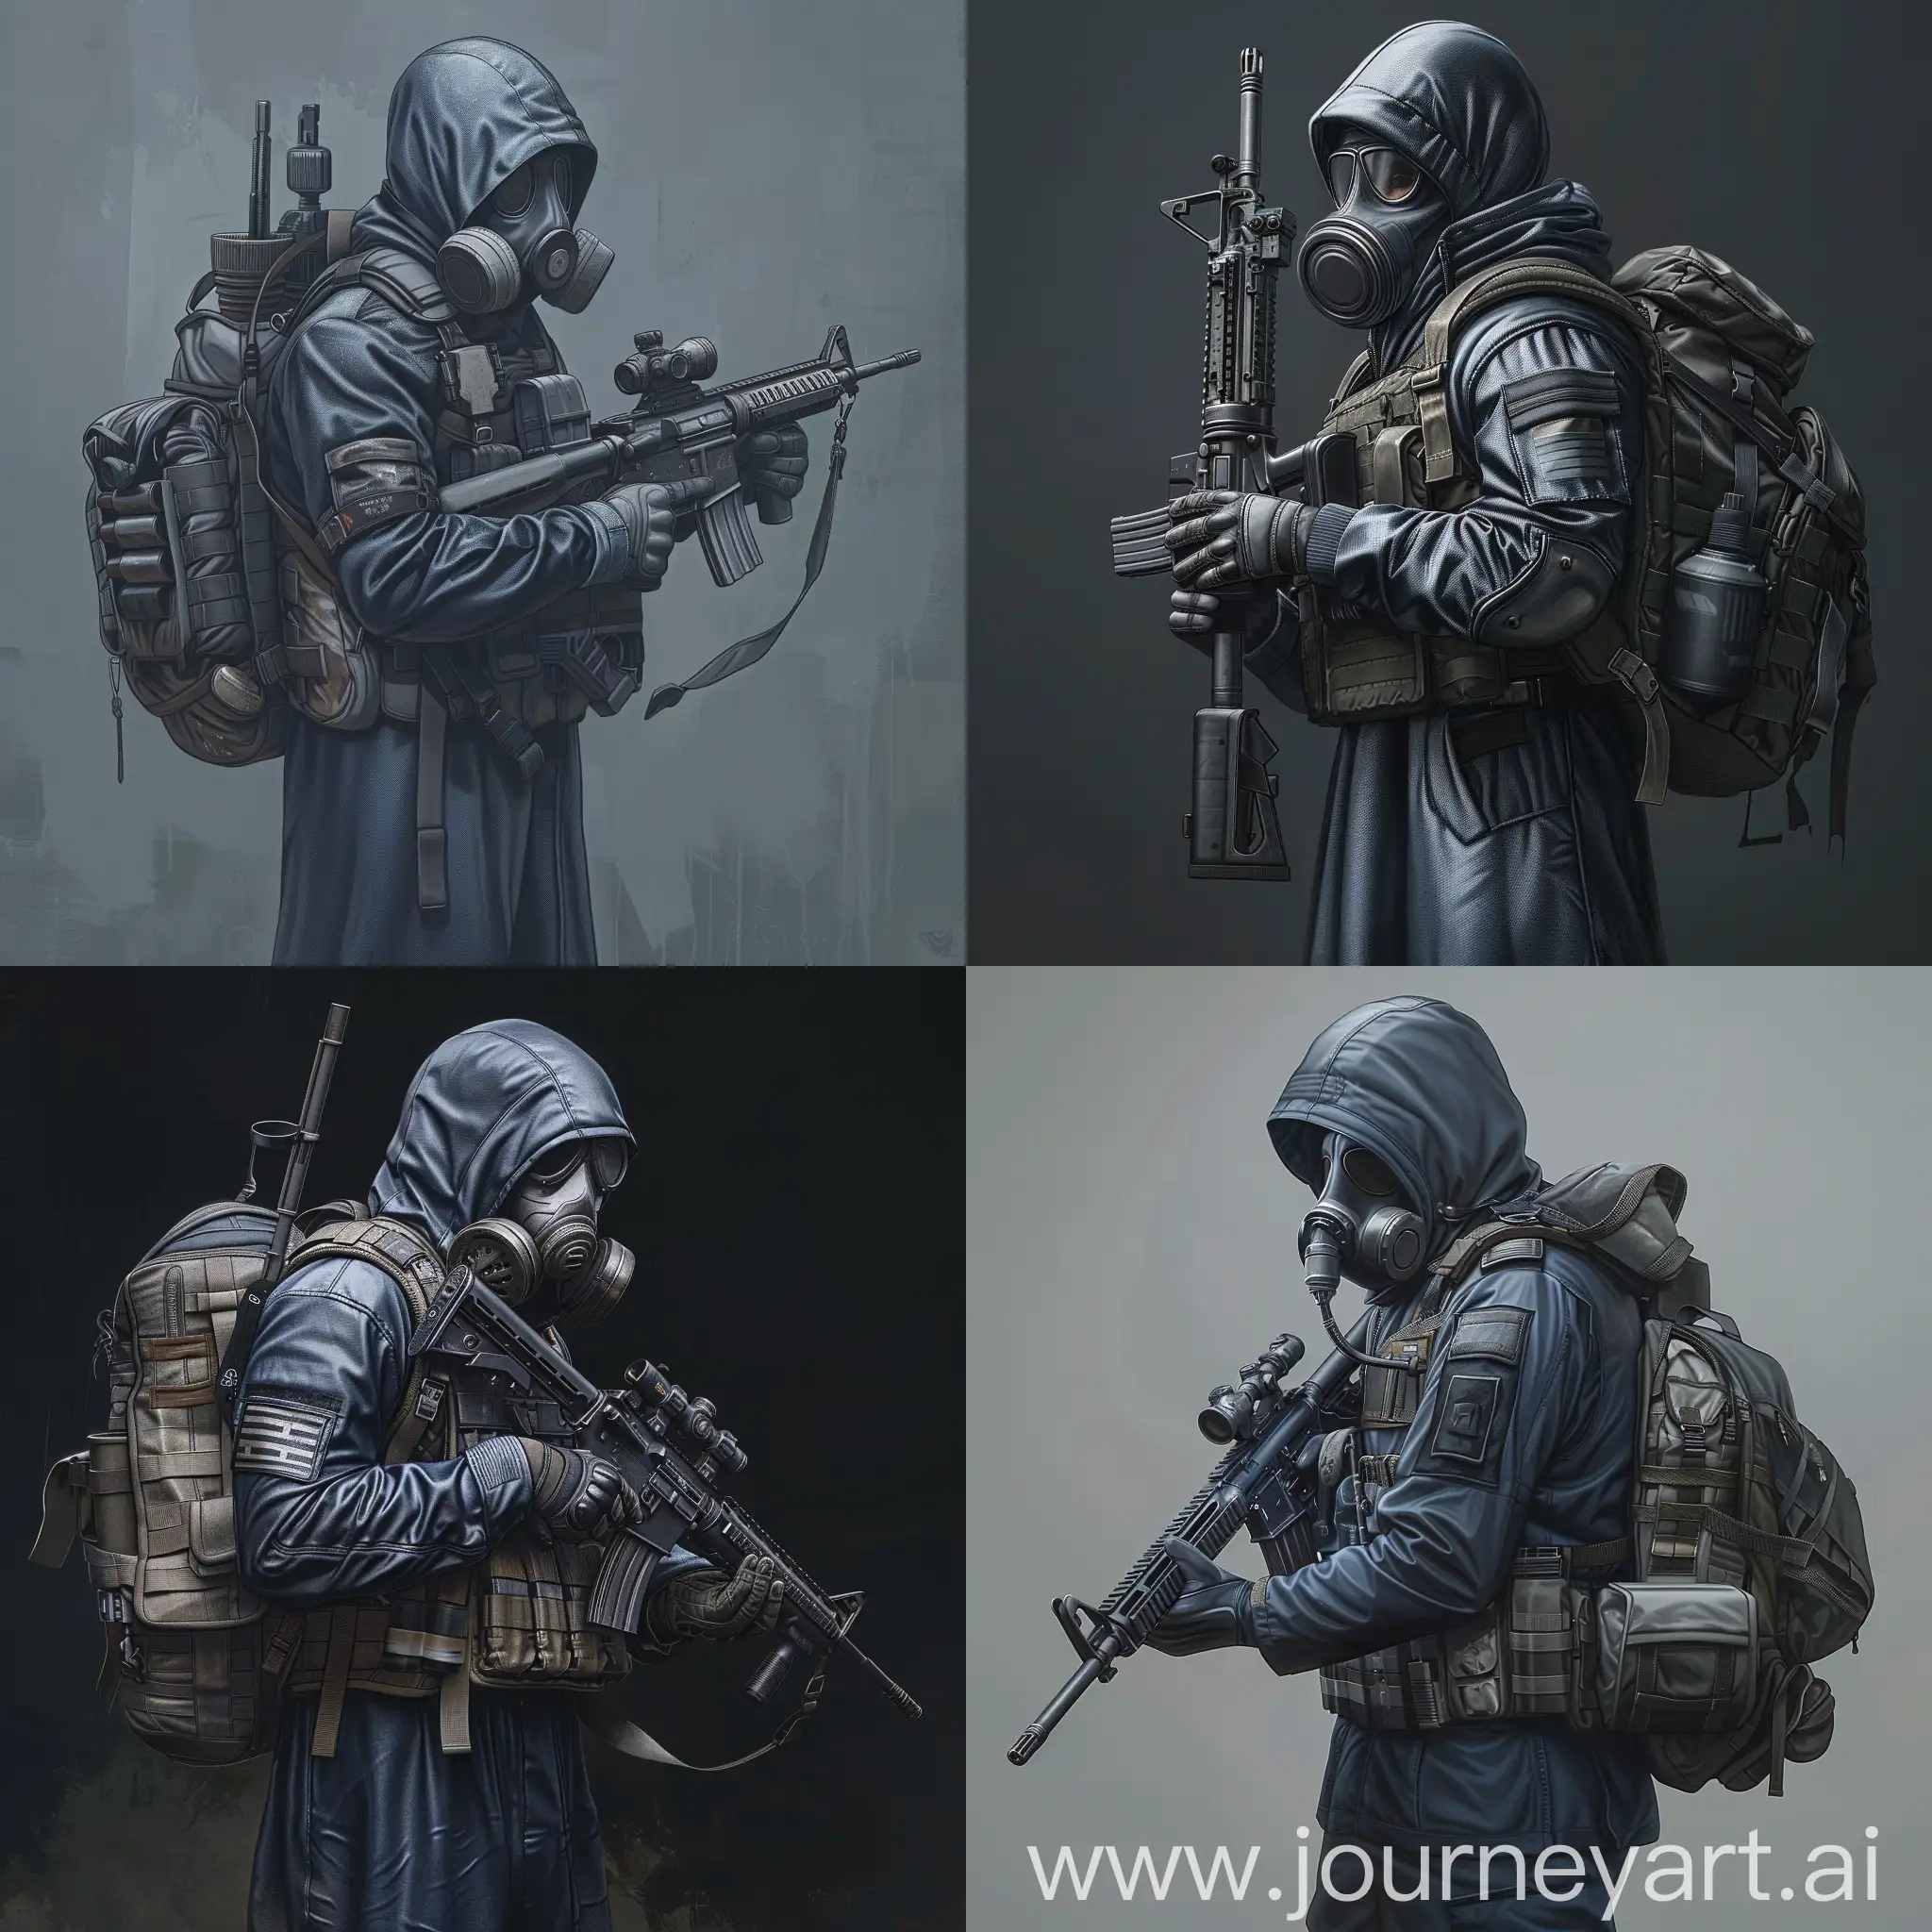 Mercenary-from-STALKER-Universe-in-Military-Gear-with-Rifle